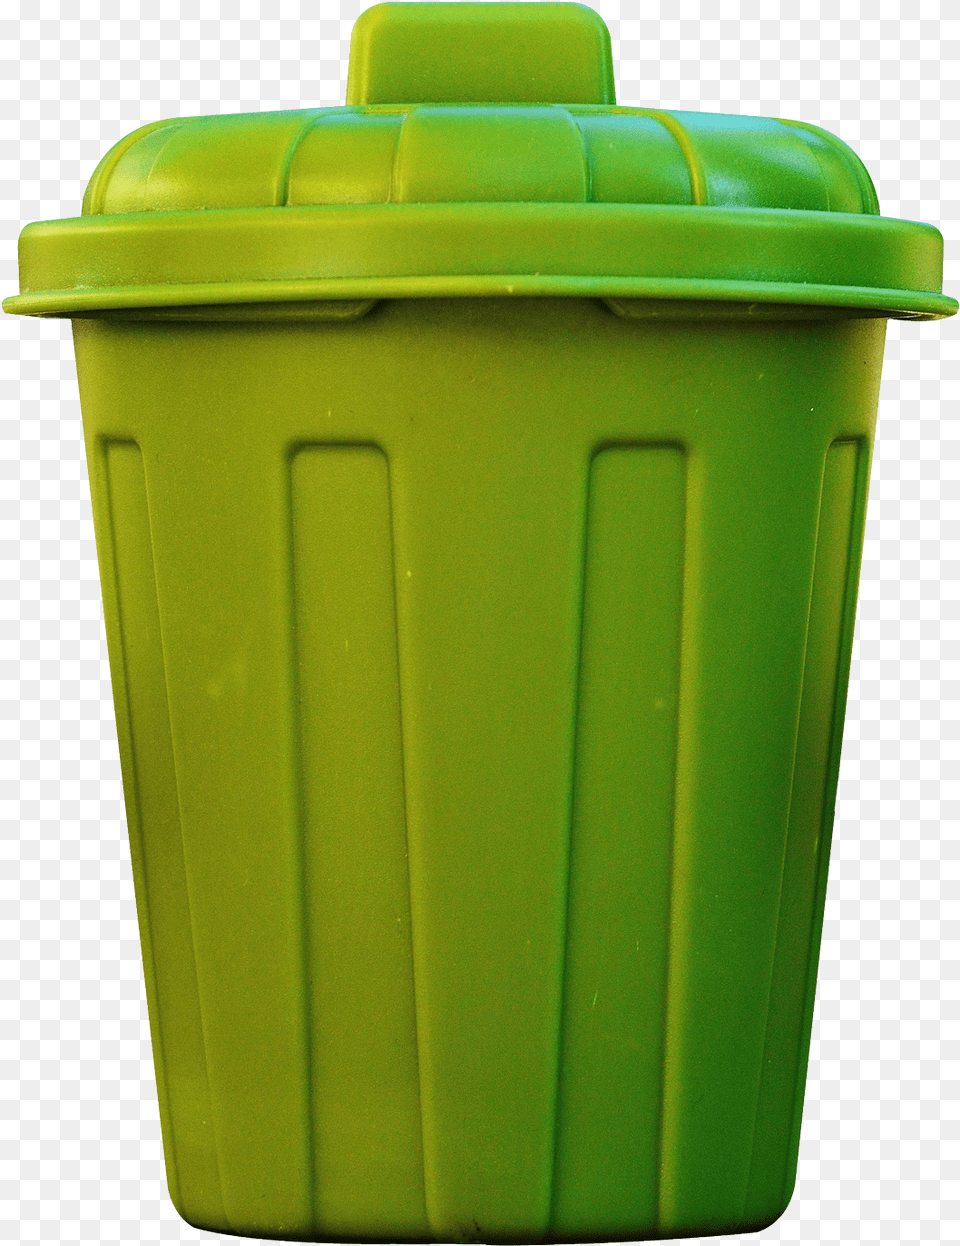 For Recycle Bin Transparent Image, Mailbox, Bottle, Can, Shaker Png